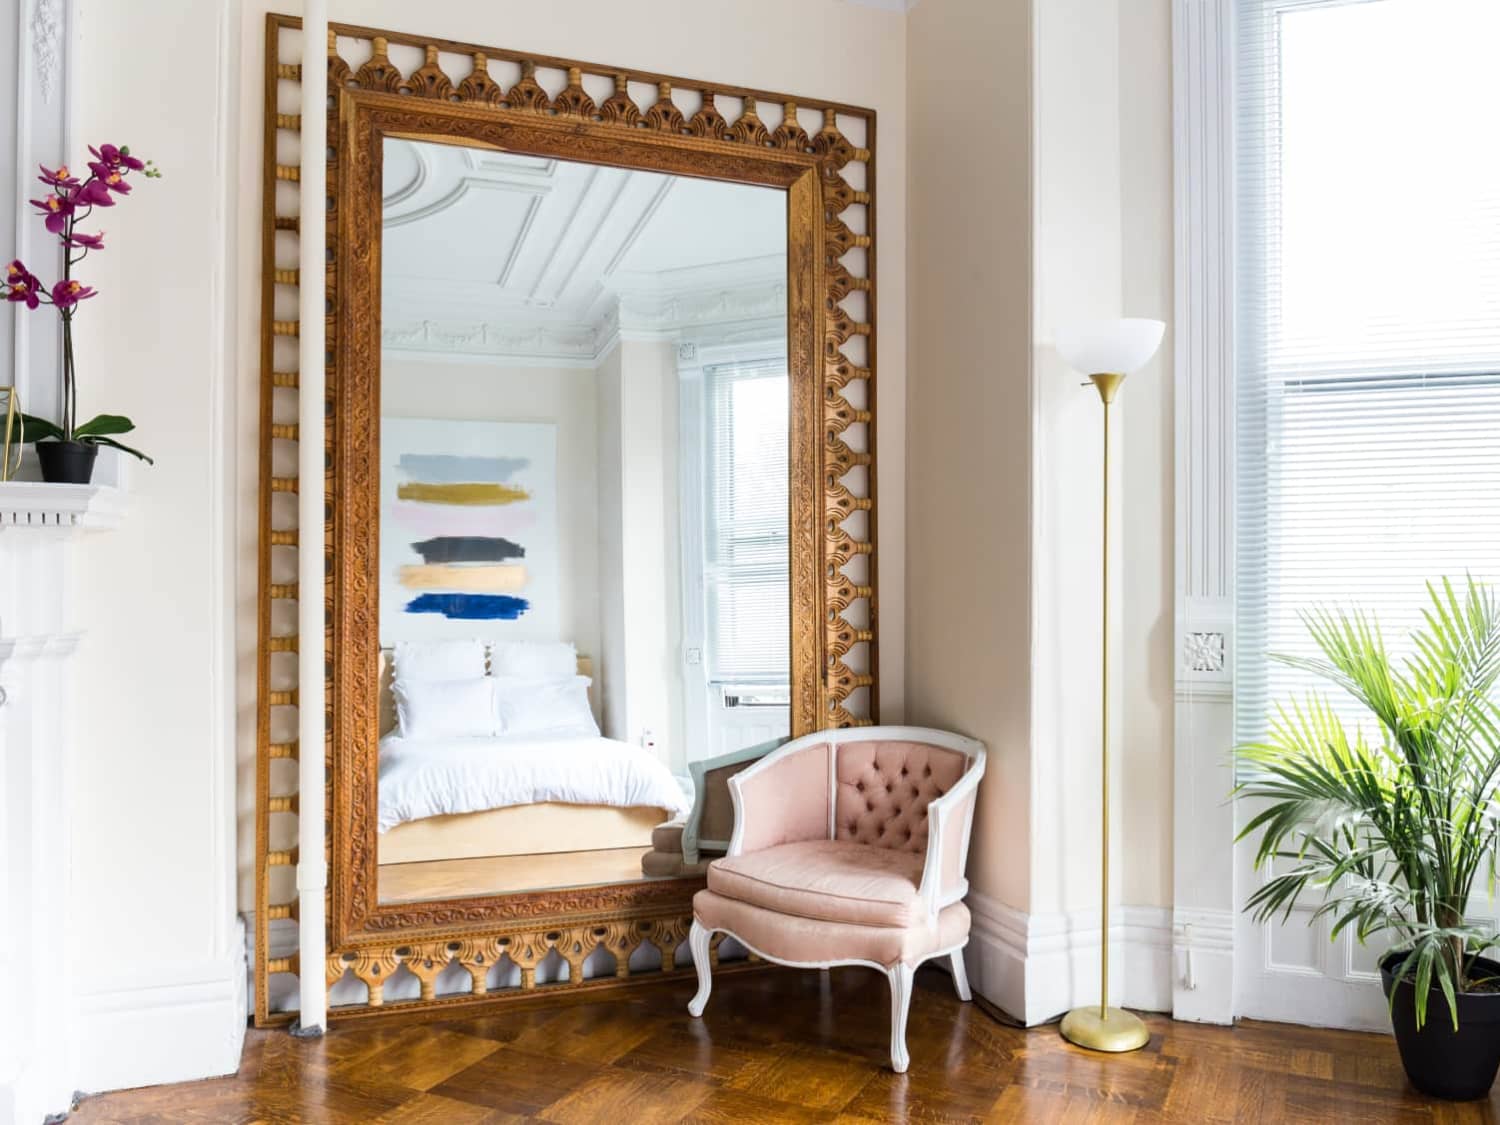 How to Use Mirrors to Make a Room Look Bigger and Brighter